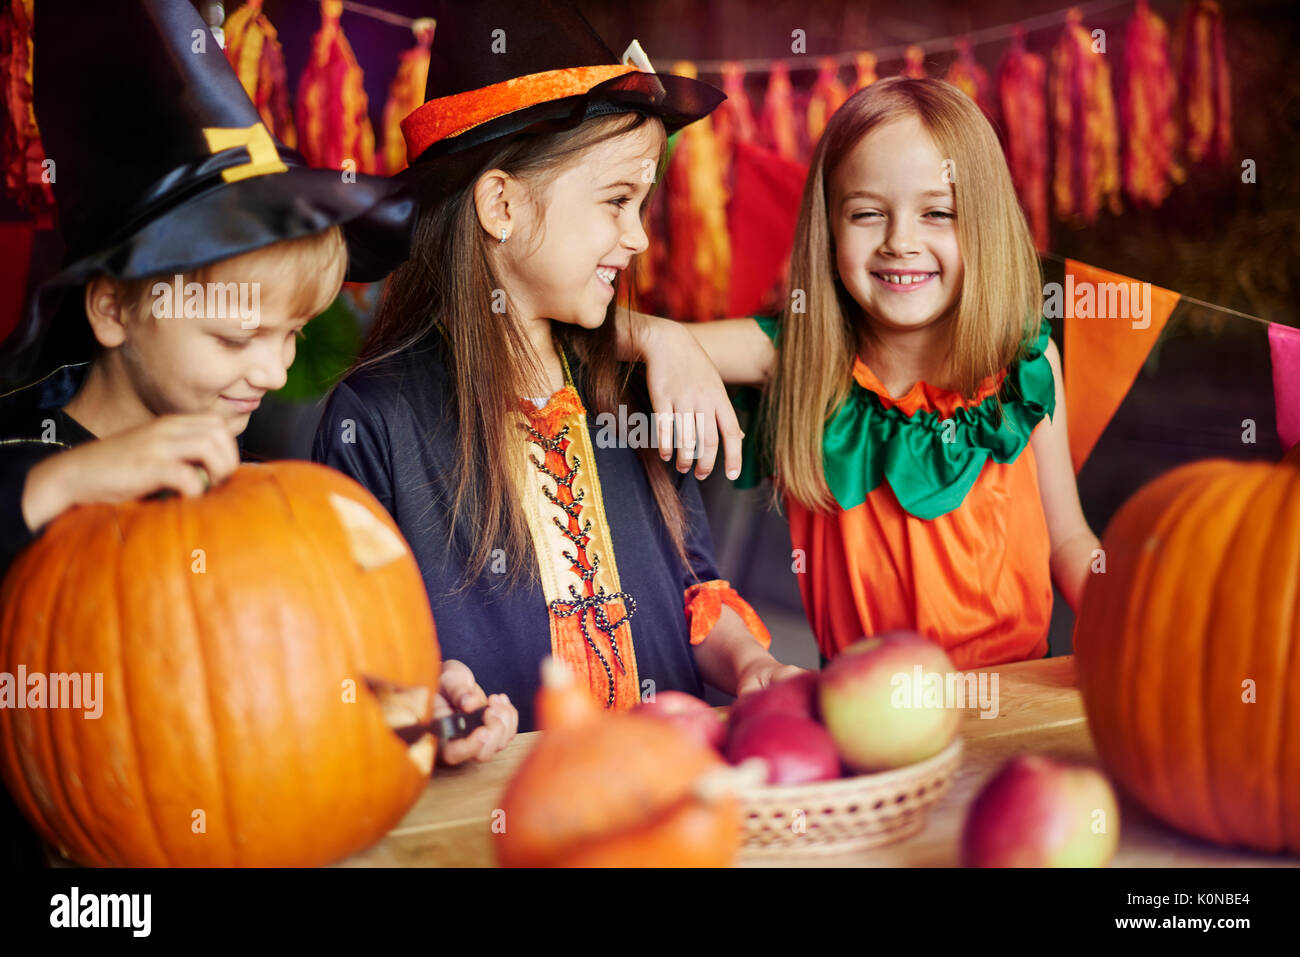 They don't seem bored or unhappy Stock Photo - Alamy